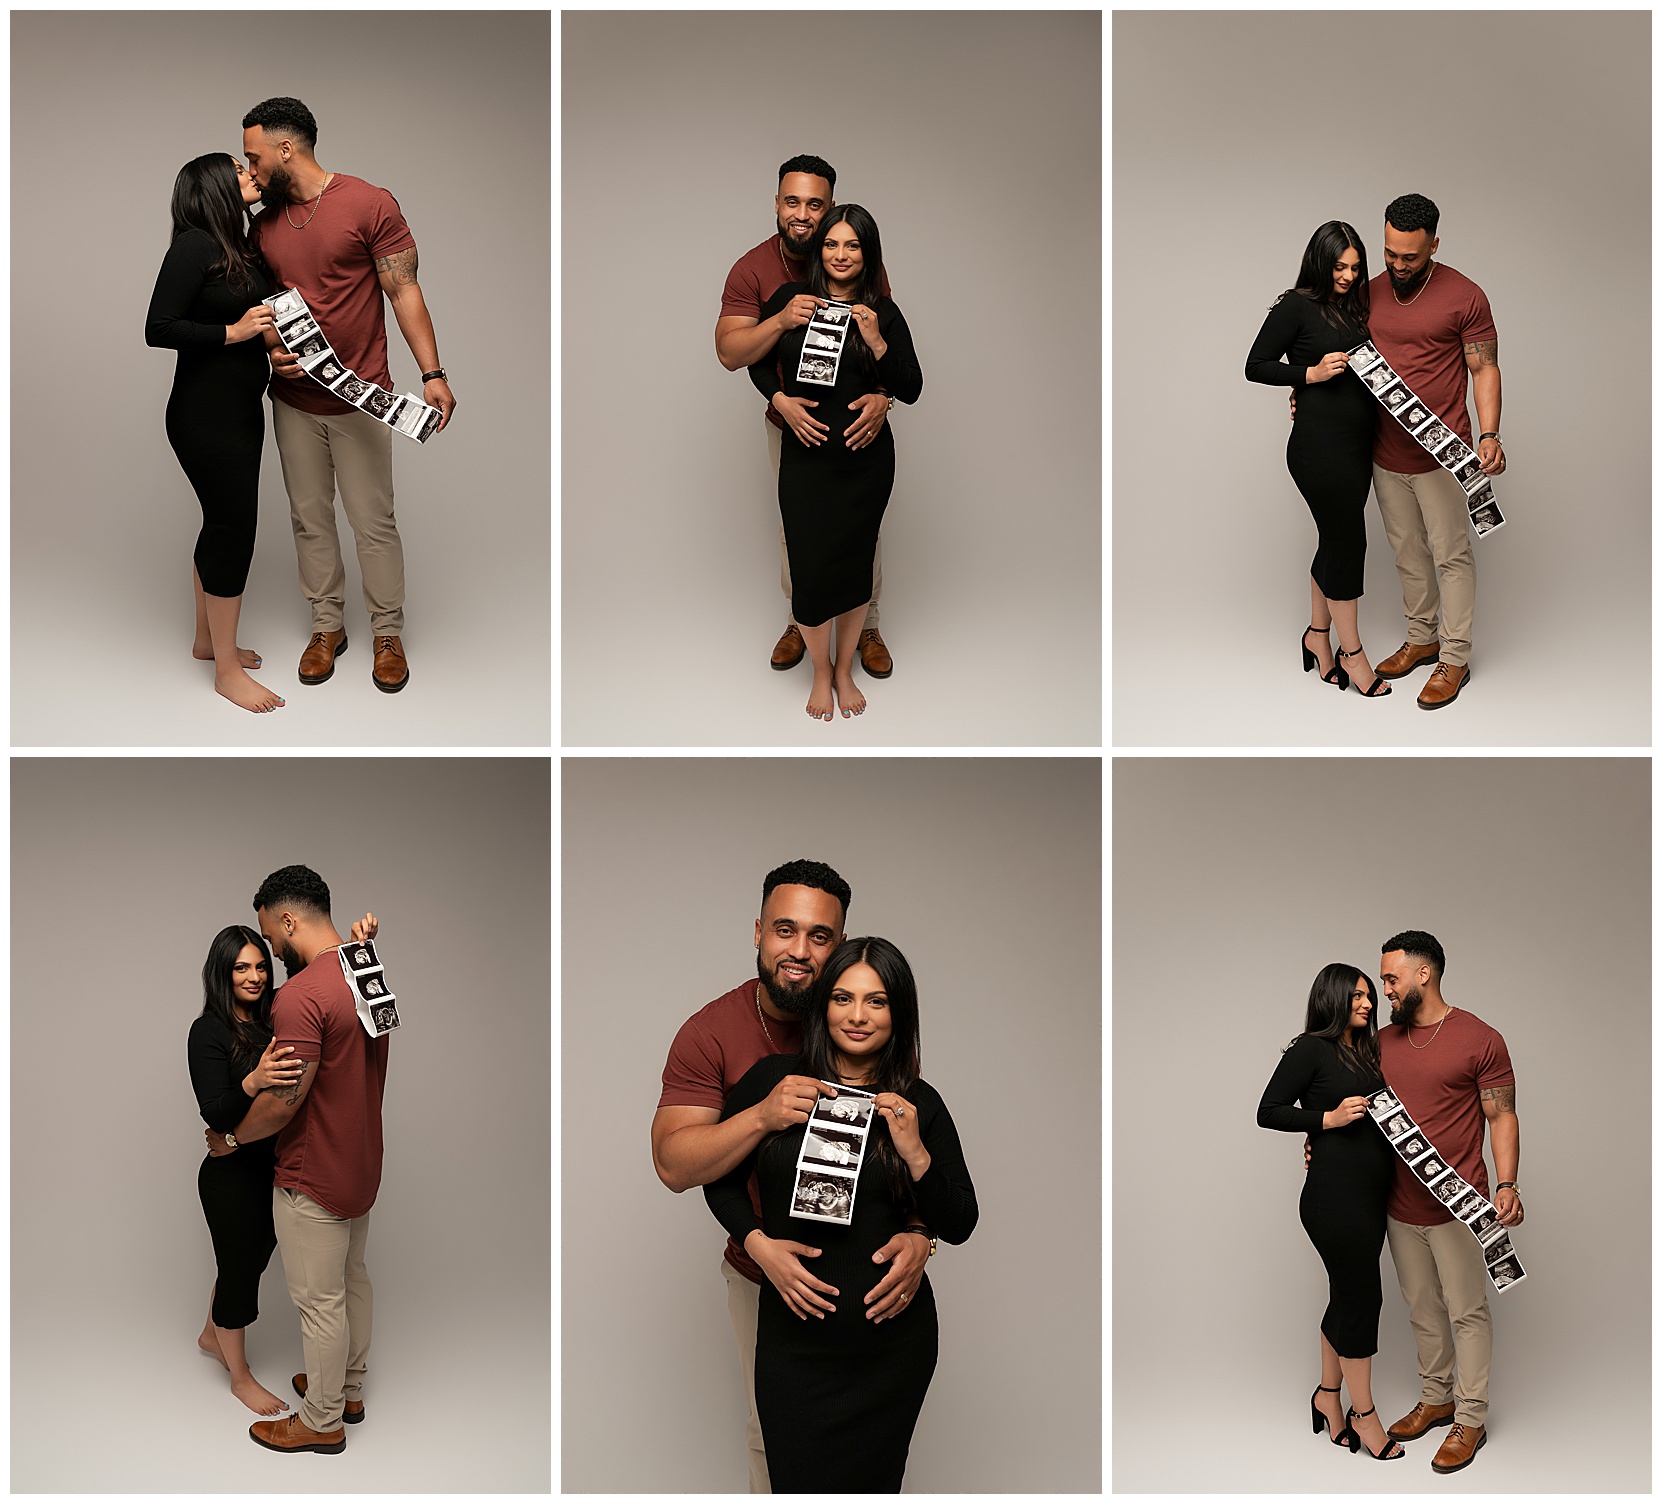 A set of six baby bump photos featuring a woman and a man showing off the woman's bump and their sonogram photos